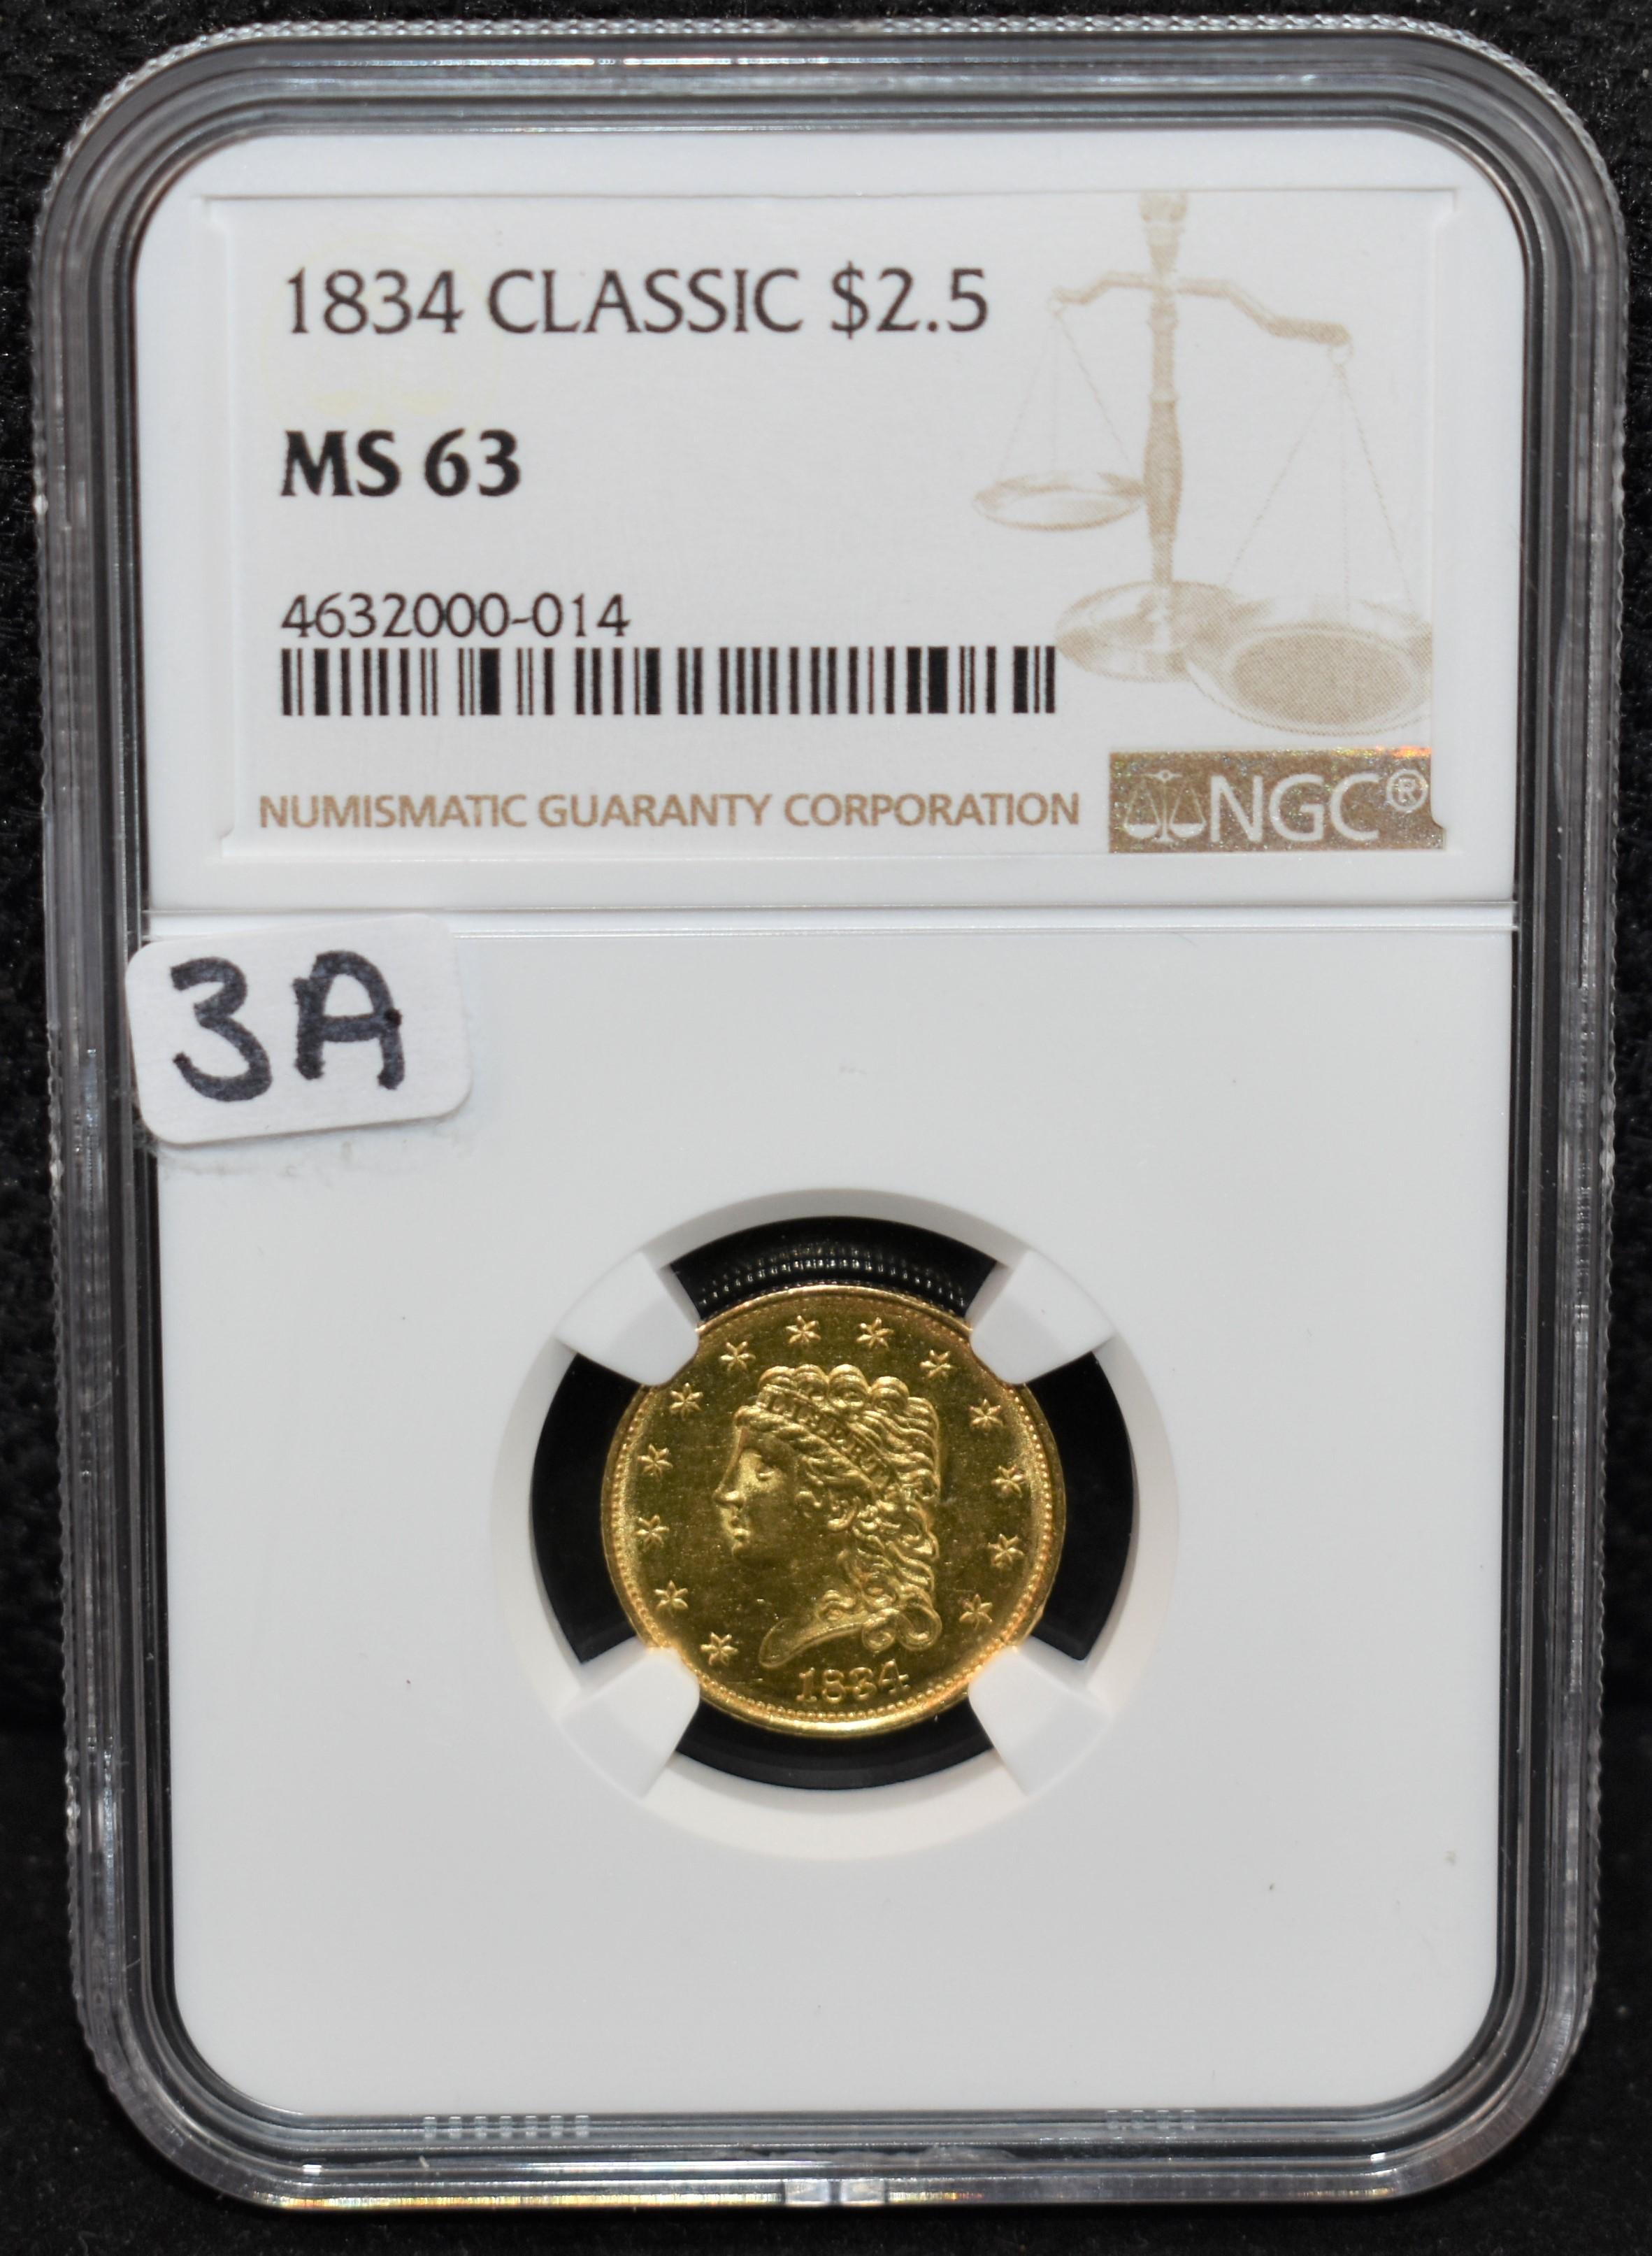 RARE 1834 CLASSIC HEAD $2 1/2 GOLD COIN NGC MS63